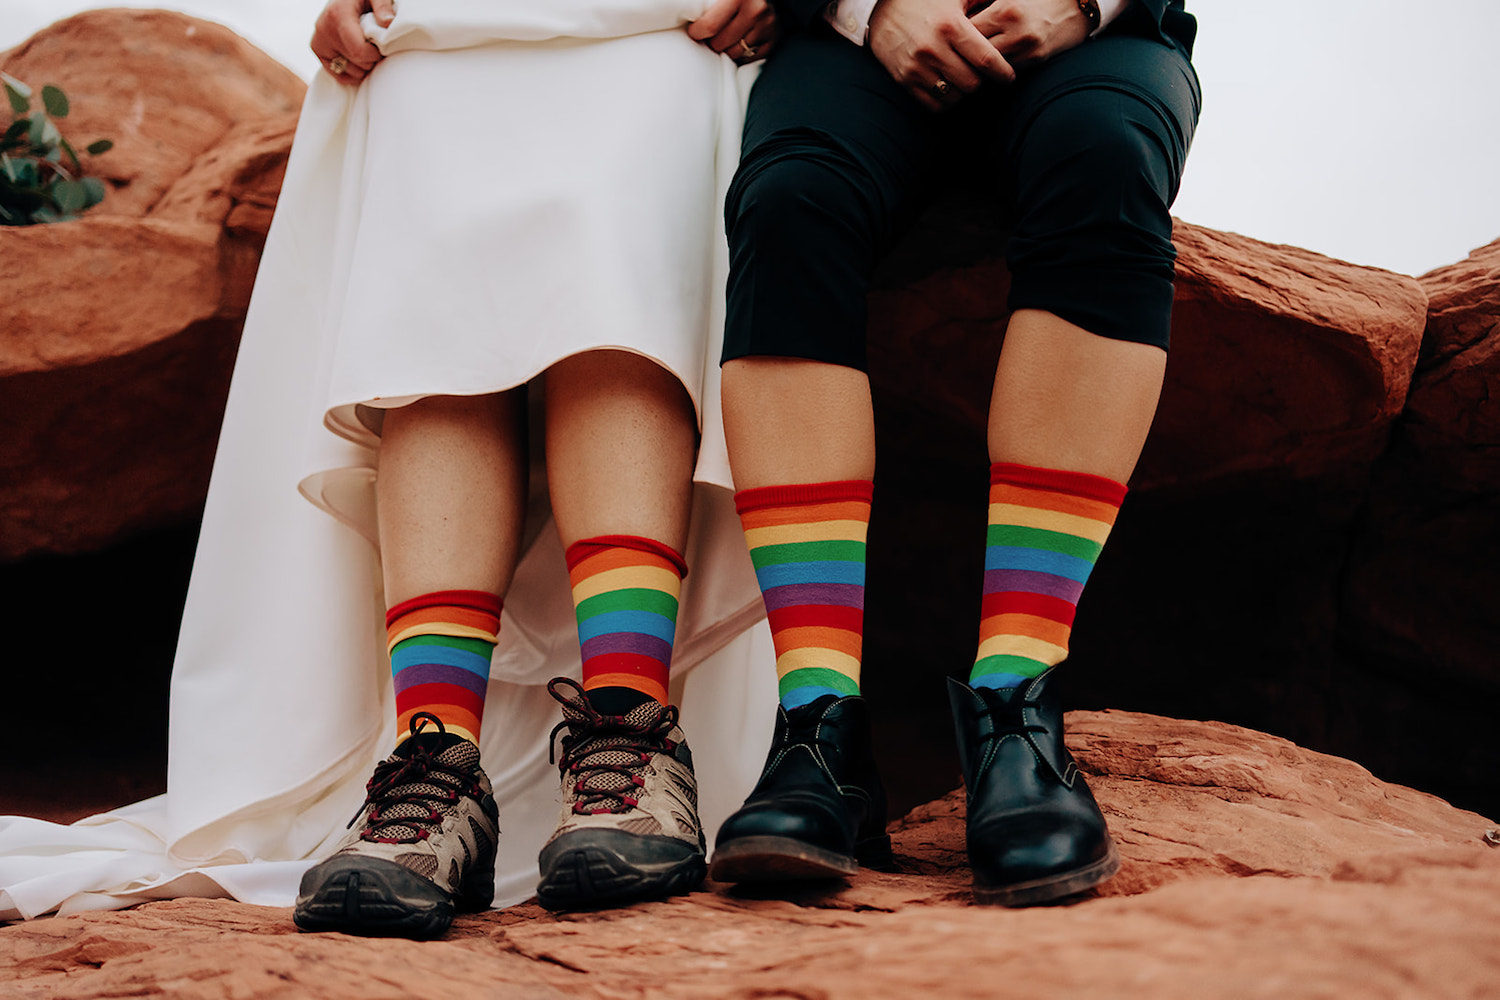 Getting married in Vegas: Close-up shot of rainbow socks worn by same-sex couple during their elopement shoot.